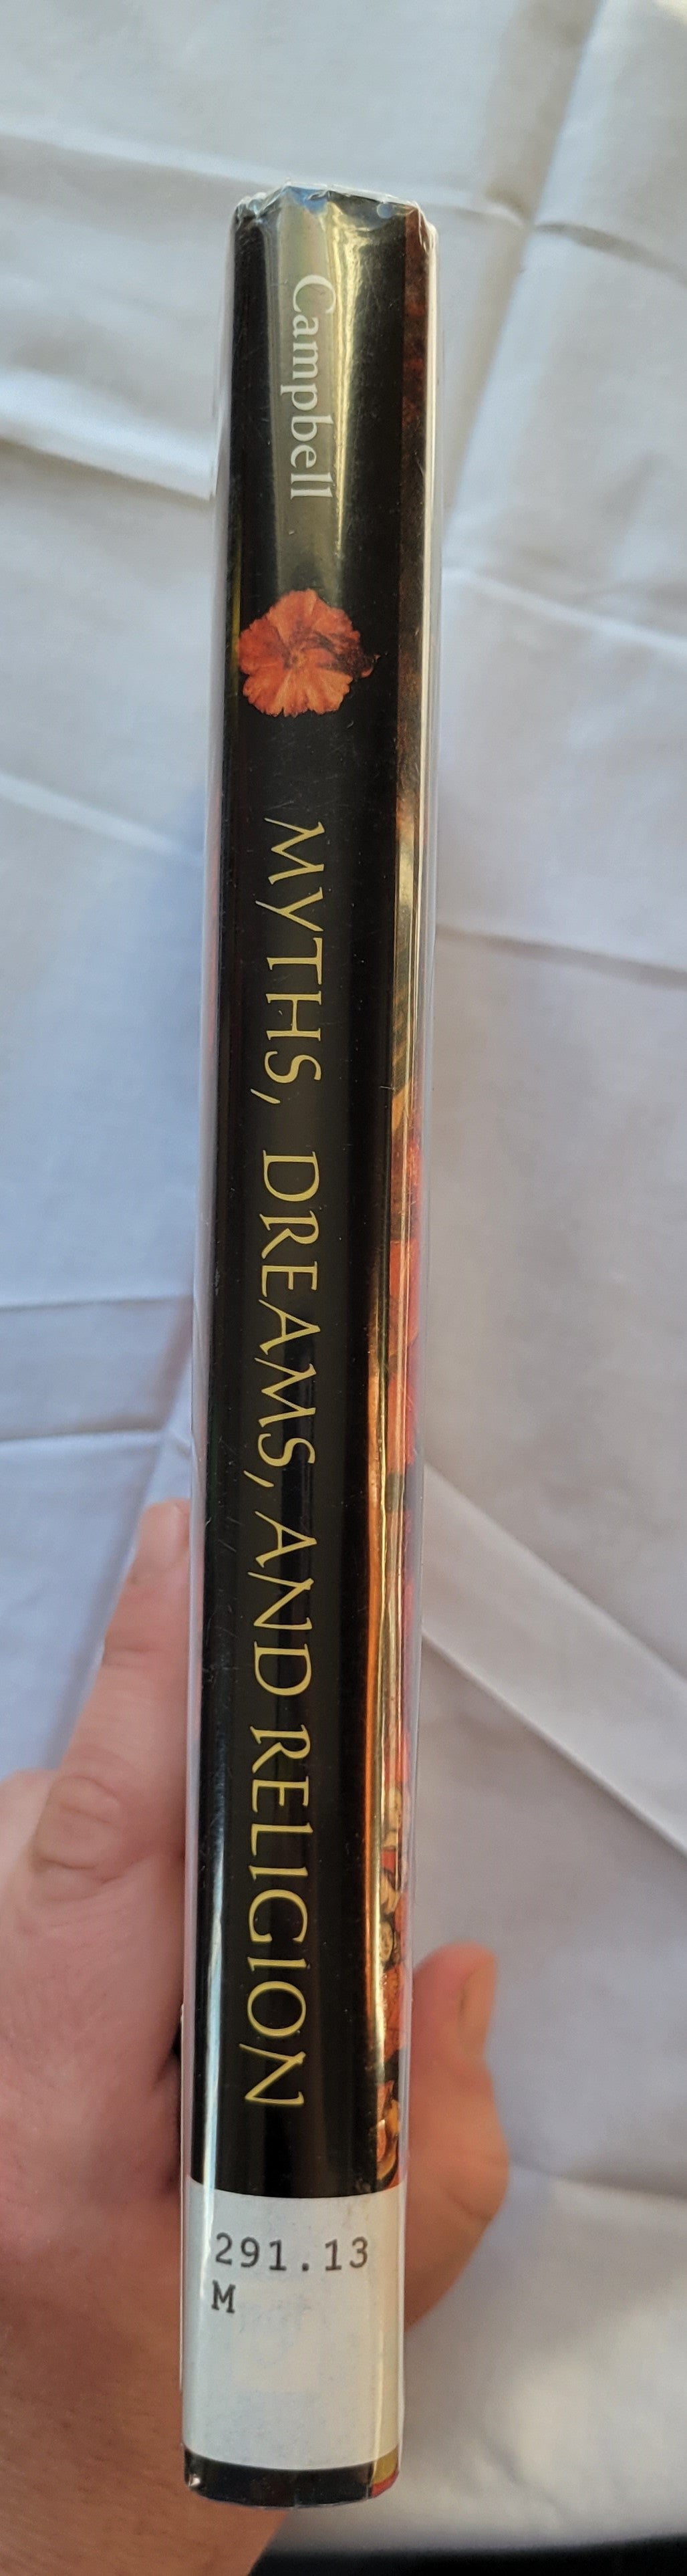 Used book for sale, "Myths, Dreams, and Religion" is a collection of essays by various authors - including Alan Watts, John F. Priest, and more - and is edited by the famous Joseph Campbell. View of spine.